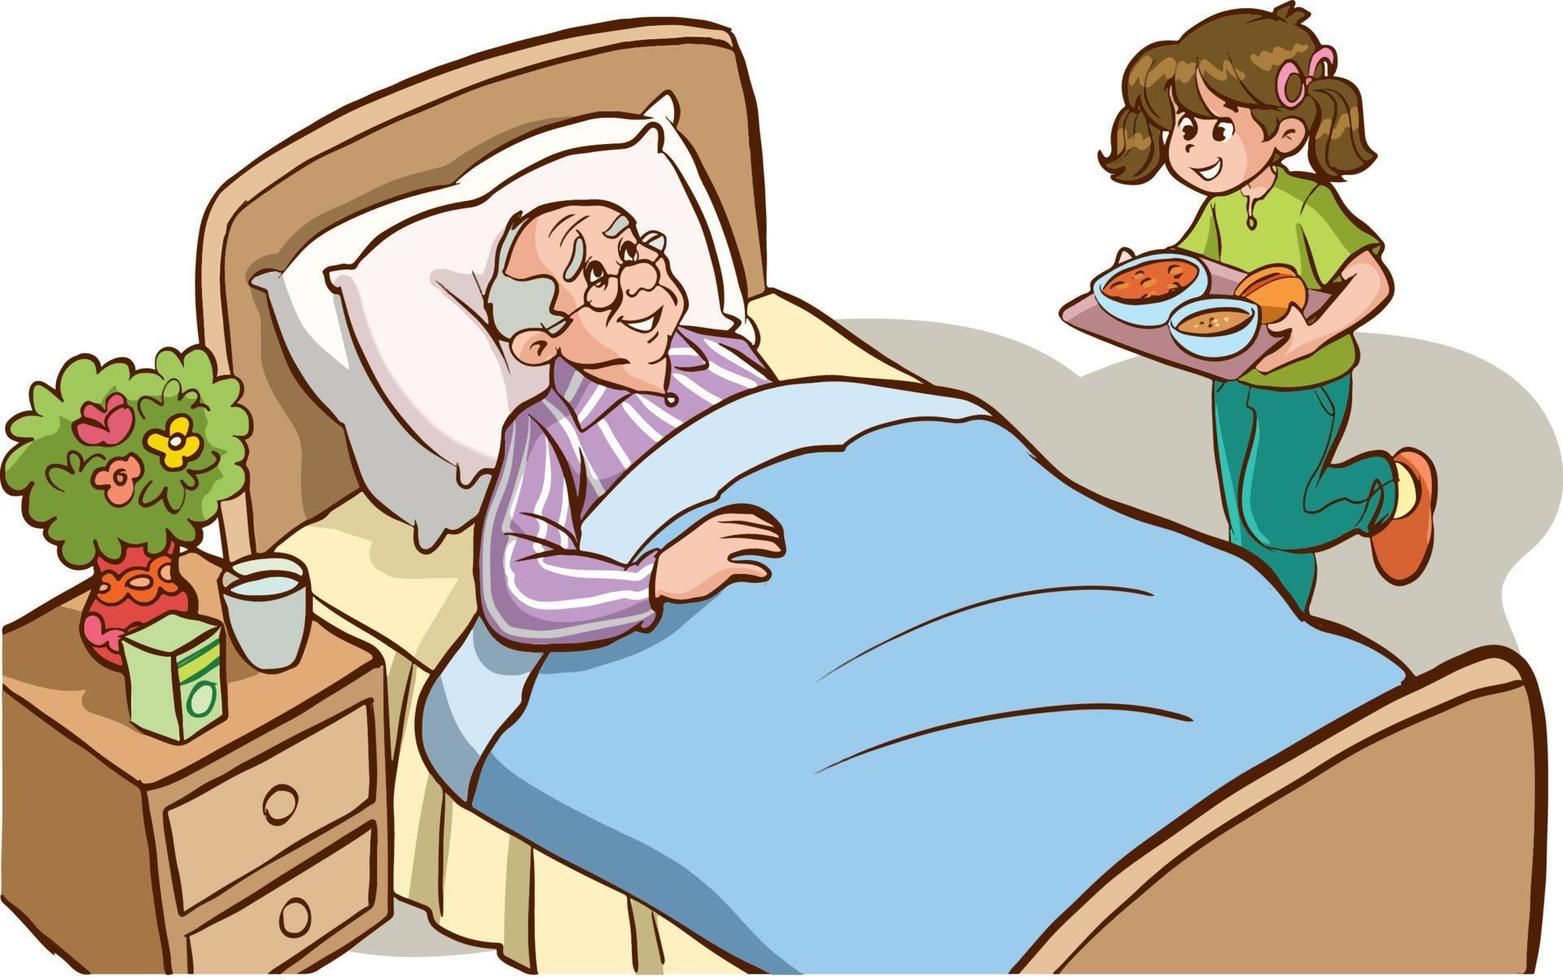 Child visiting grandfather in hospital. grandchild taking food to his sick grandfather cartoon vector